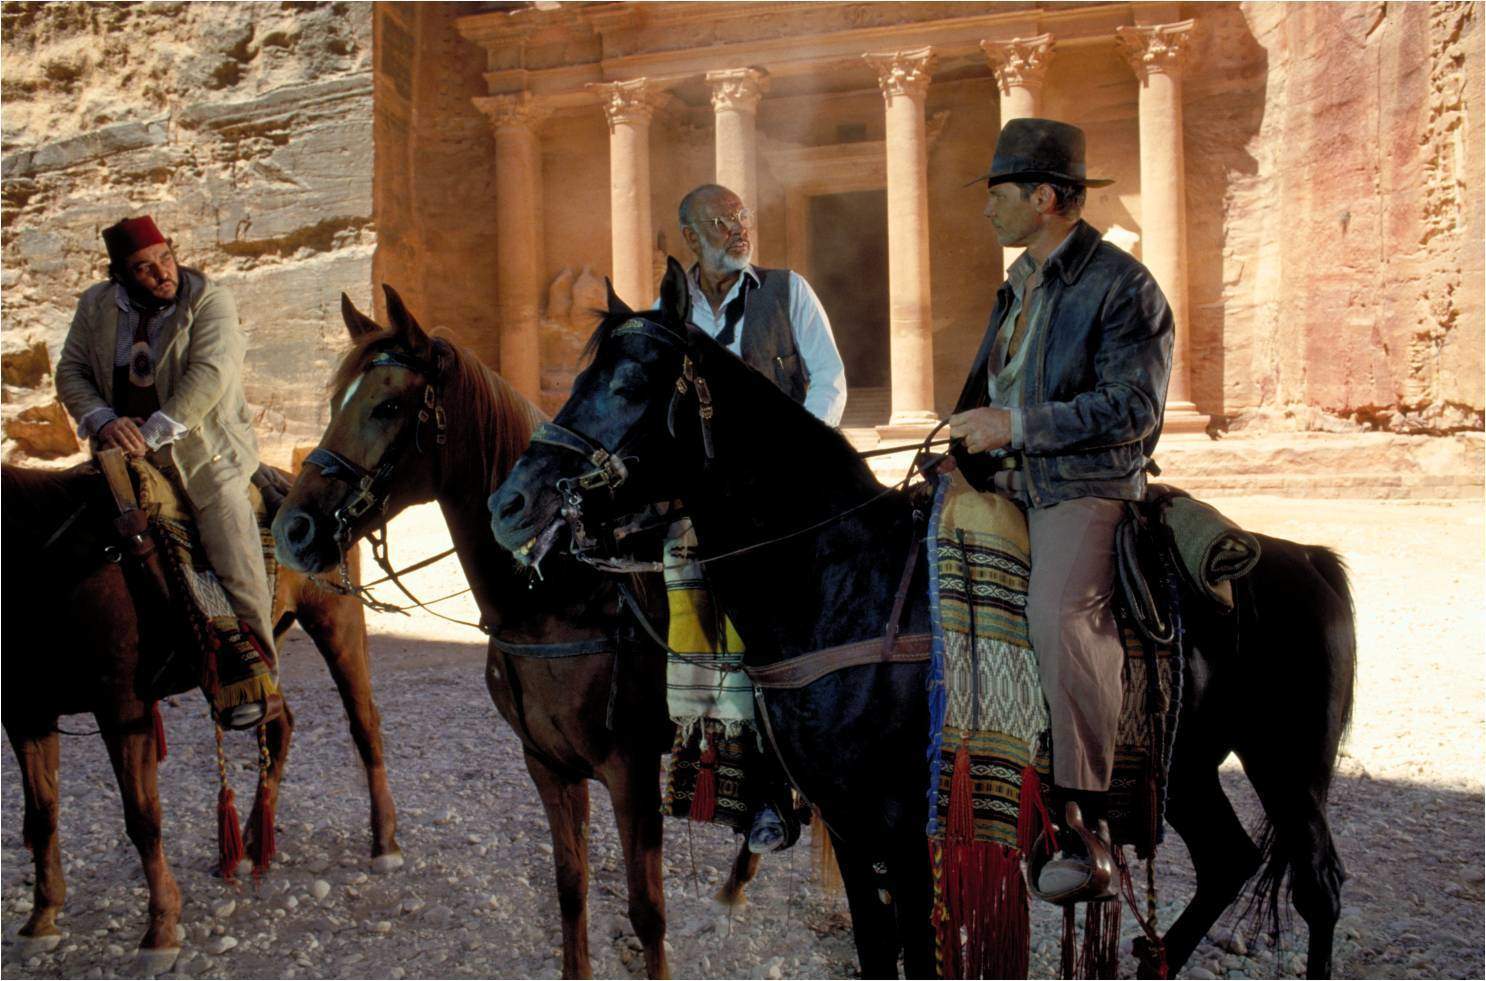  Screenshot from the 1989 film "Indiana Jones and the Last Crusade" with the Treasury in Petra in the background (Paramount Pictures)